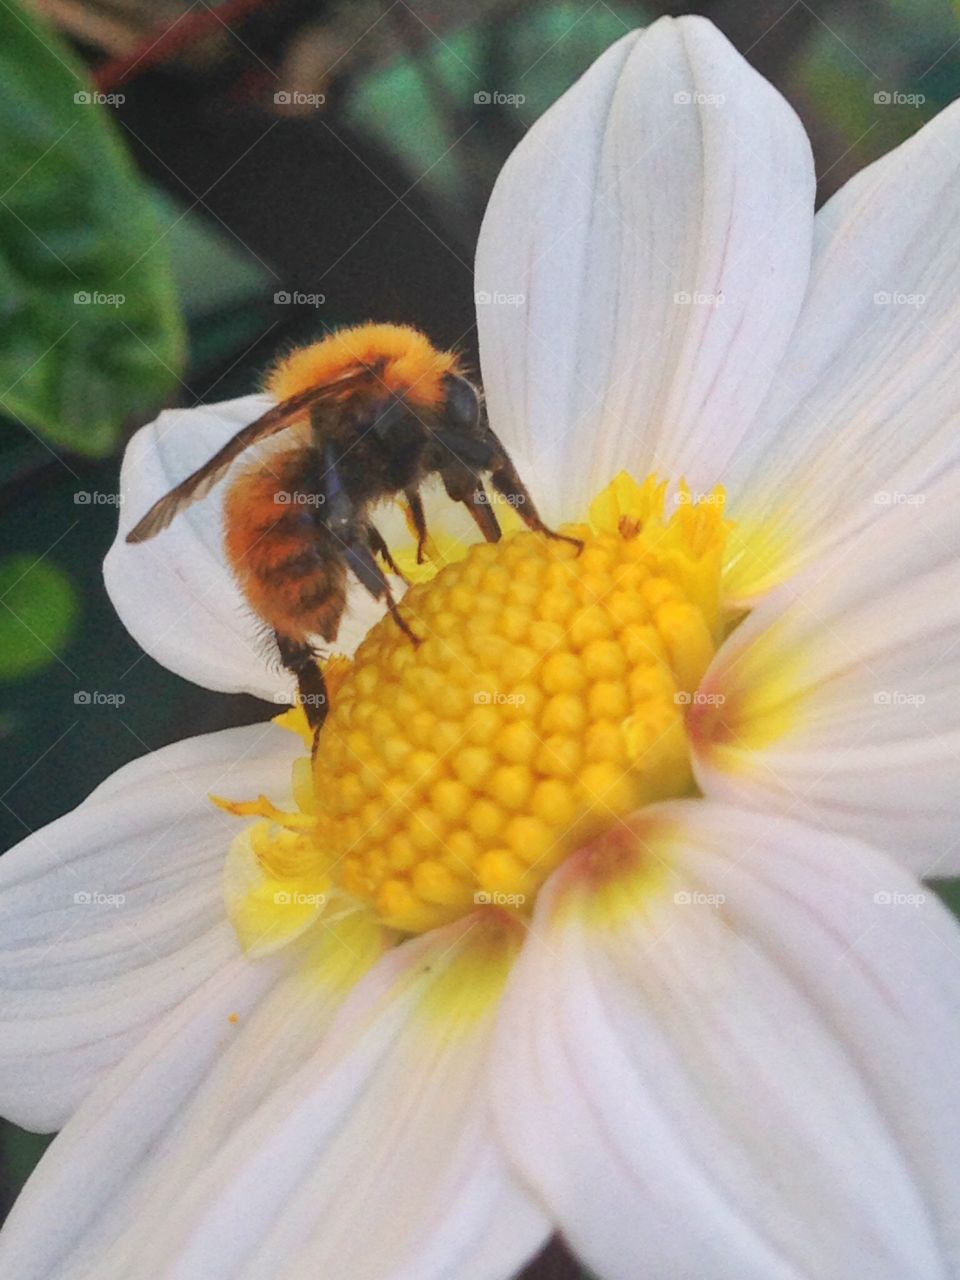 A favulou bee is sucking nectar from the flower